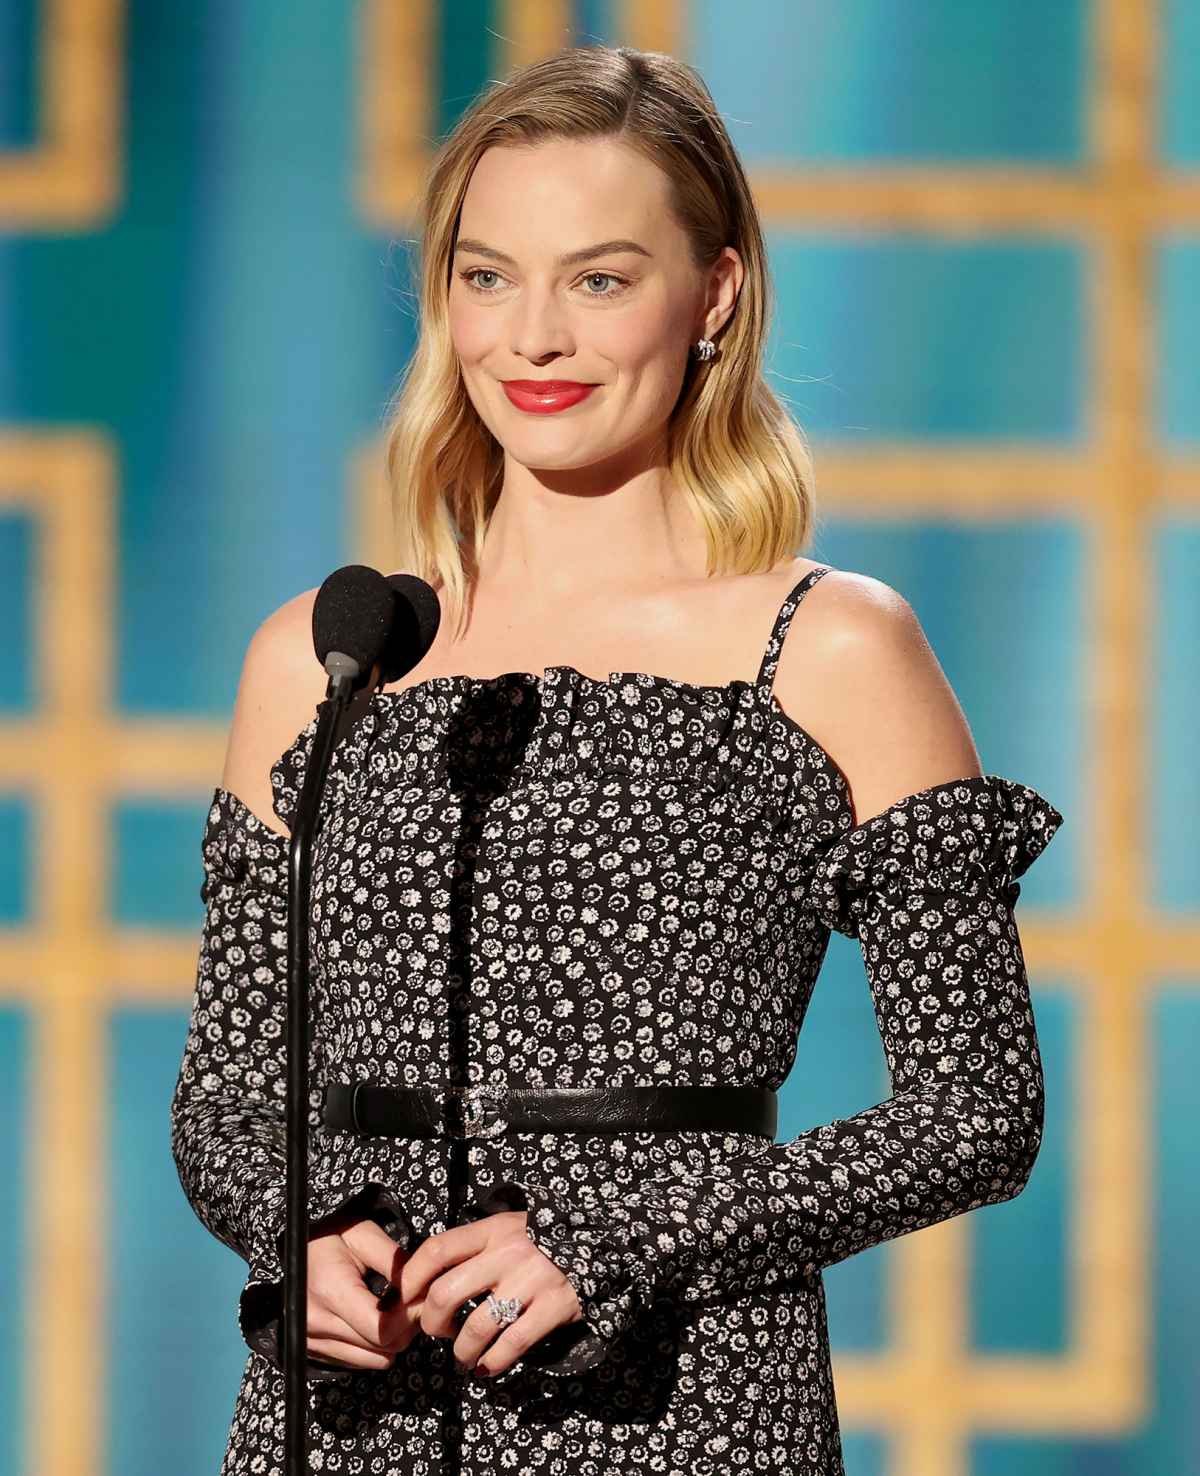 Celebrities sparkle in Van Cleef & Arpels at the 70th Annual Golden Globes  